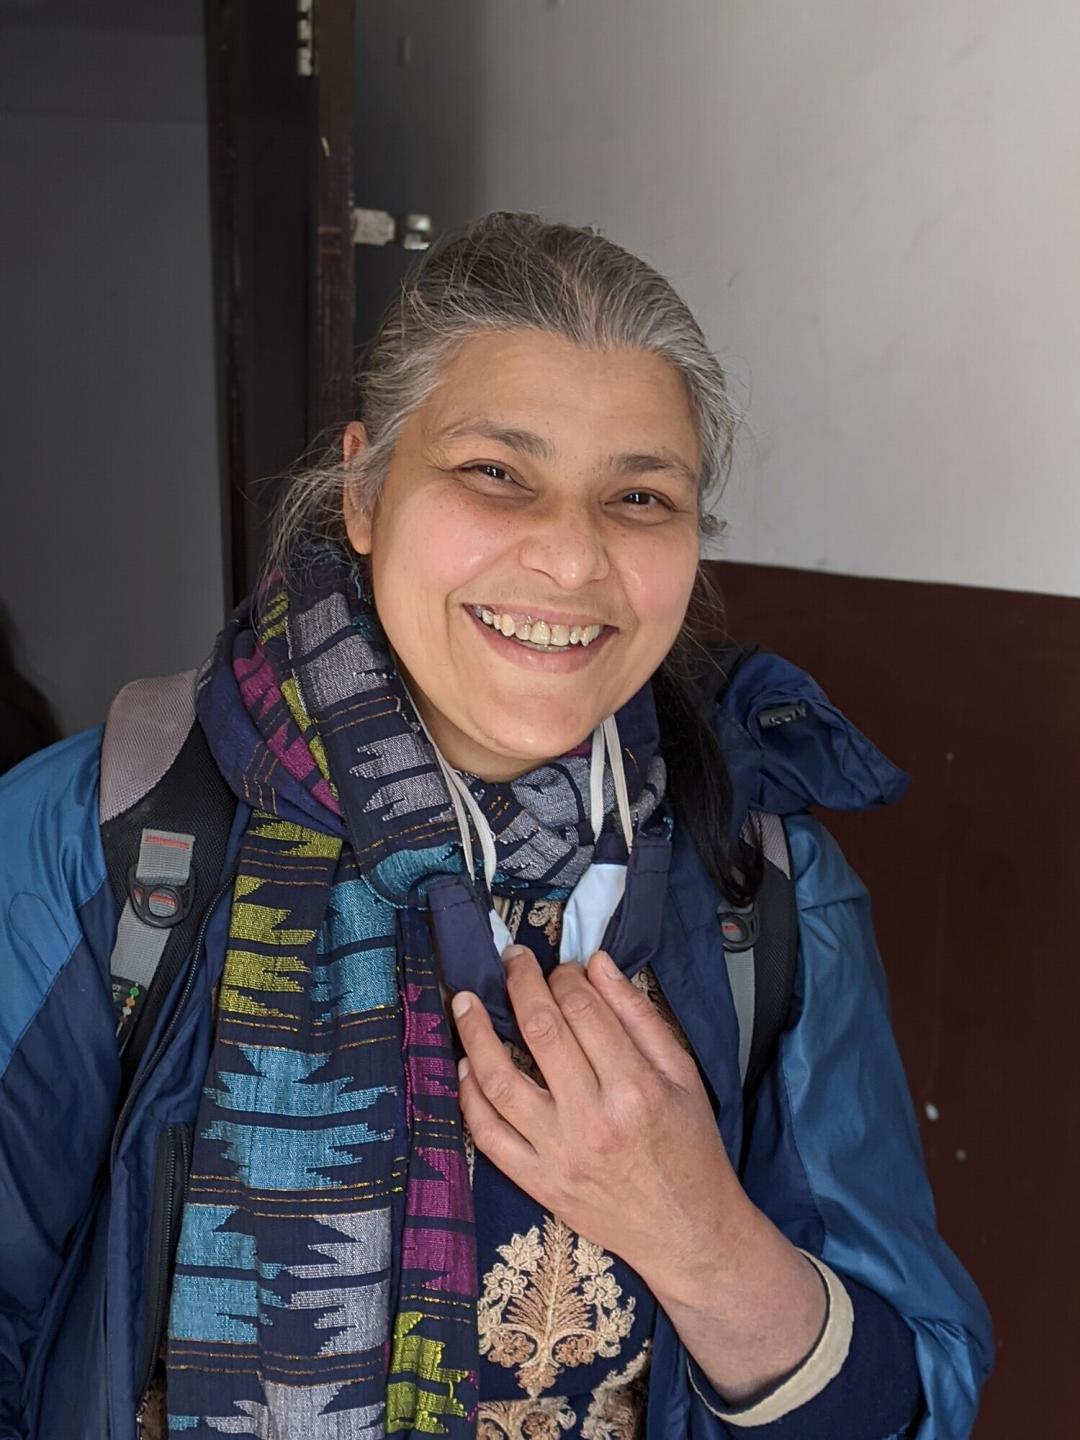 A portrait of a Nepali woman with grey hair and a colorful scarf